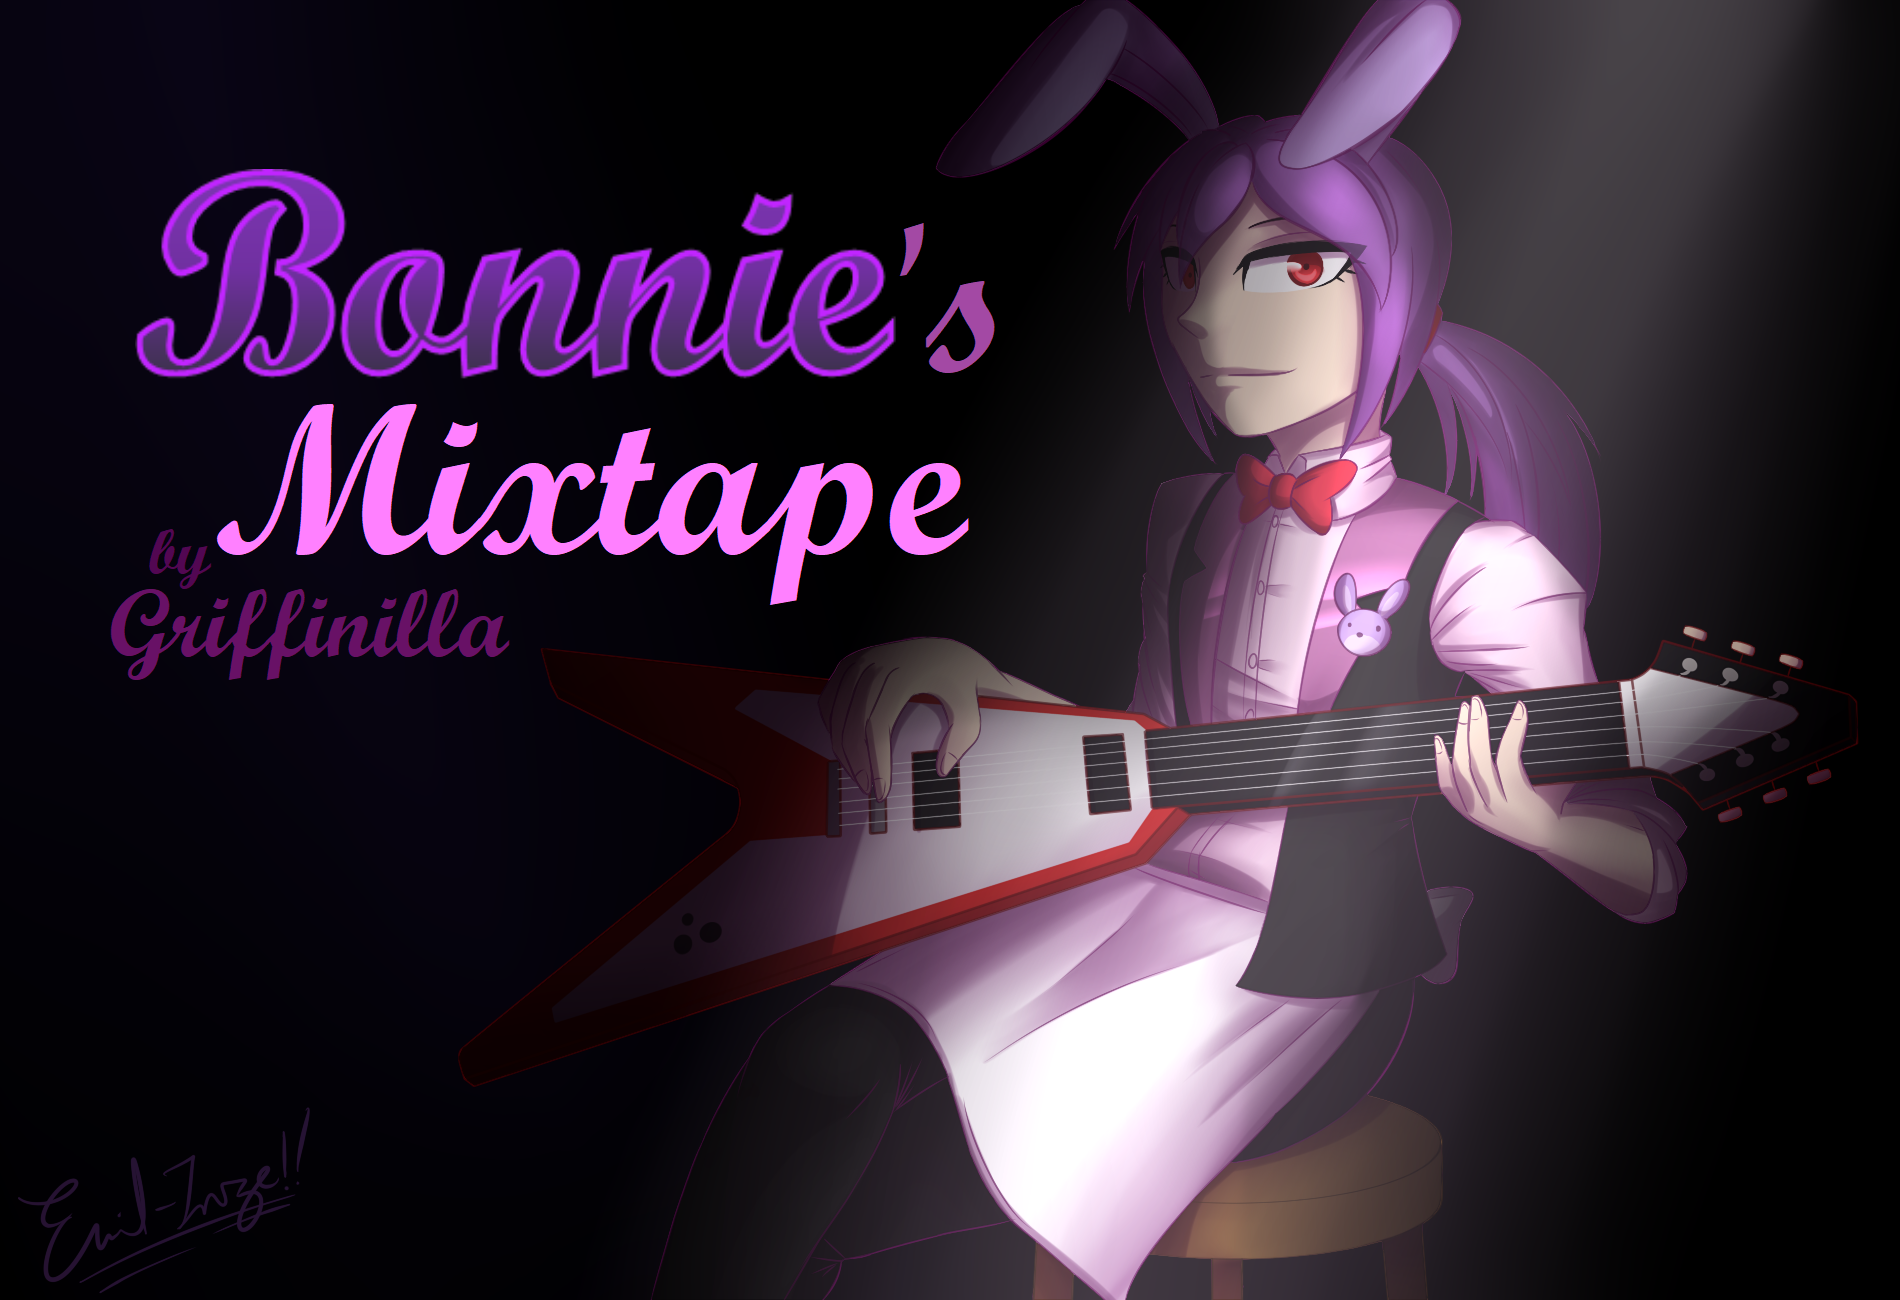 FNaC: Candy the Cat (Remastered) by Emil-Inze on DeviantArt